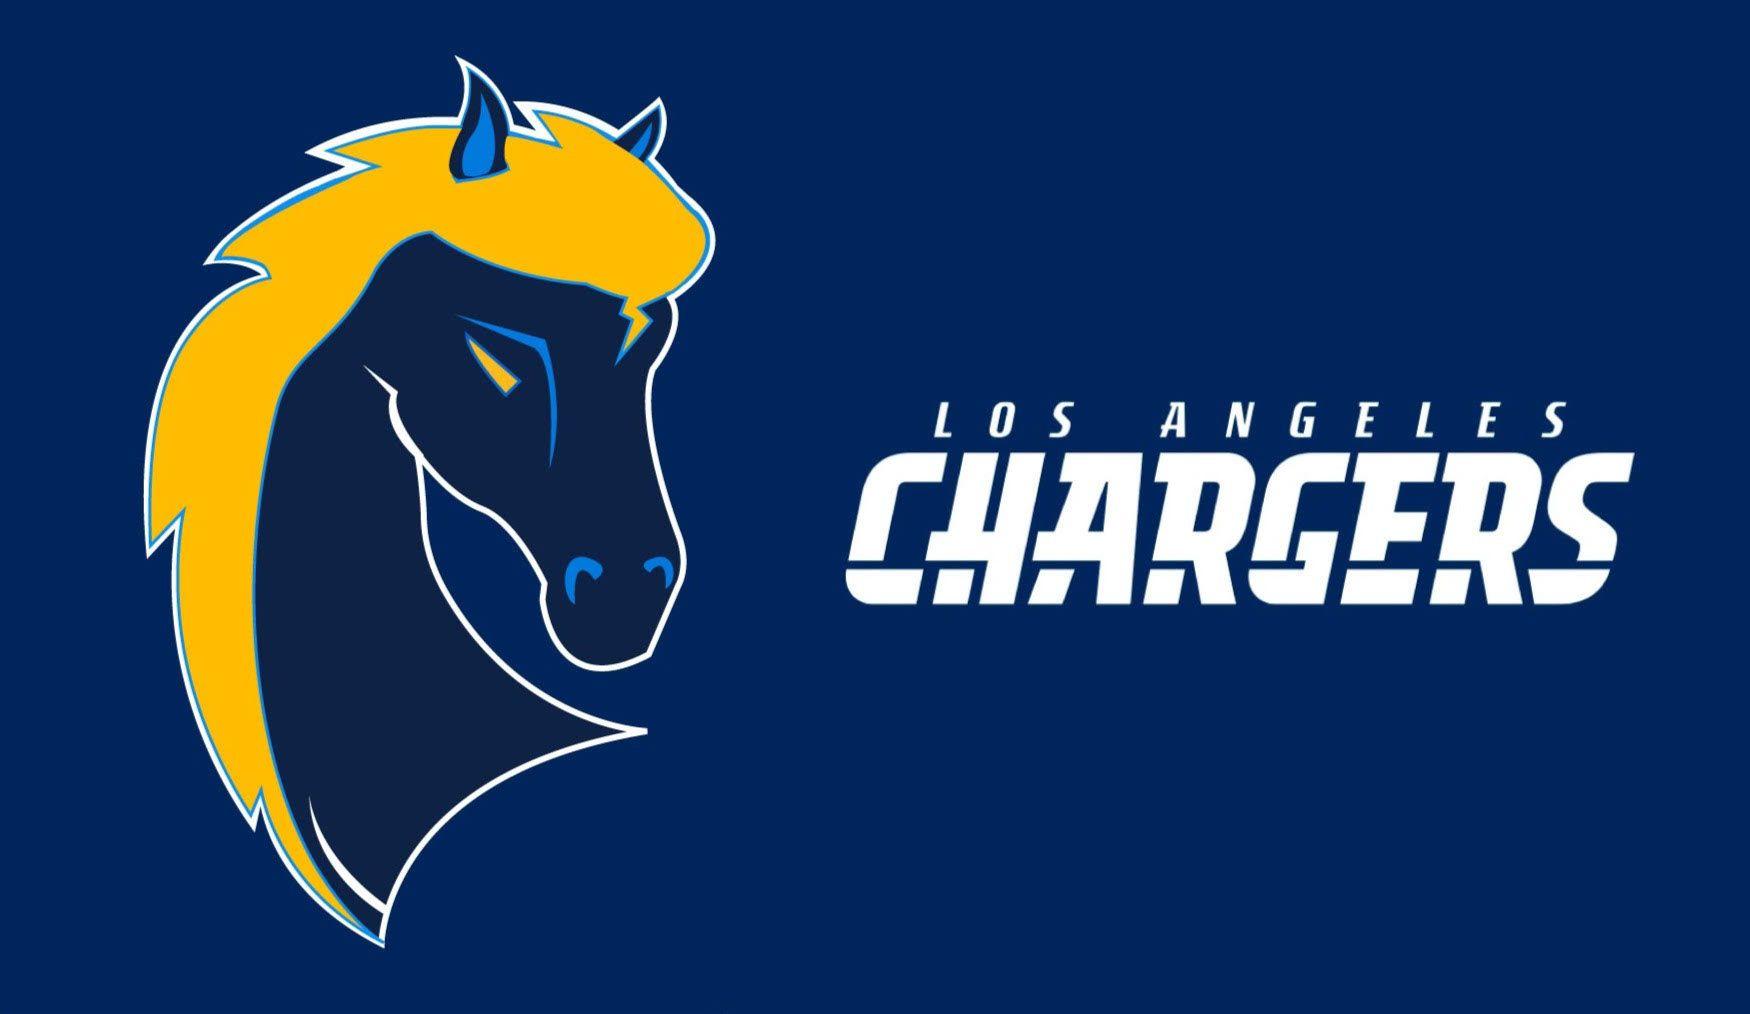 Los Angeles Chargers Logo - Micah Sheets - Los Angeles Chargers Concept Logo